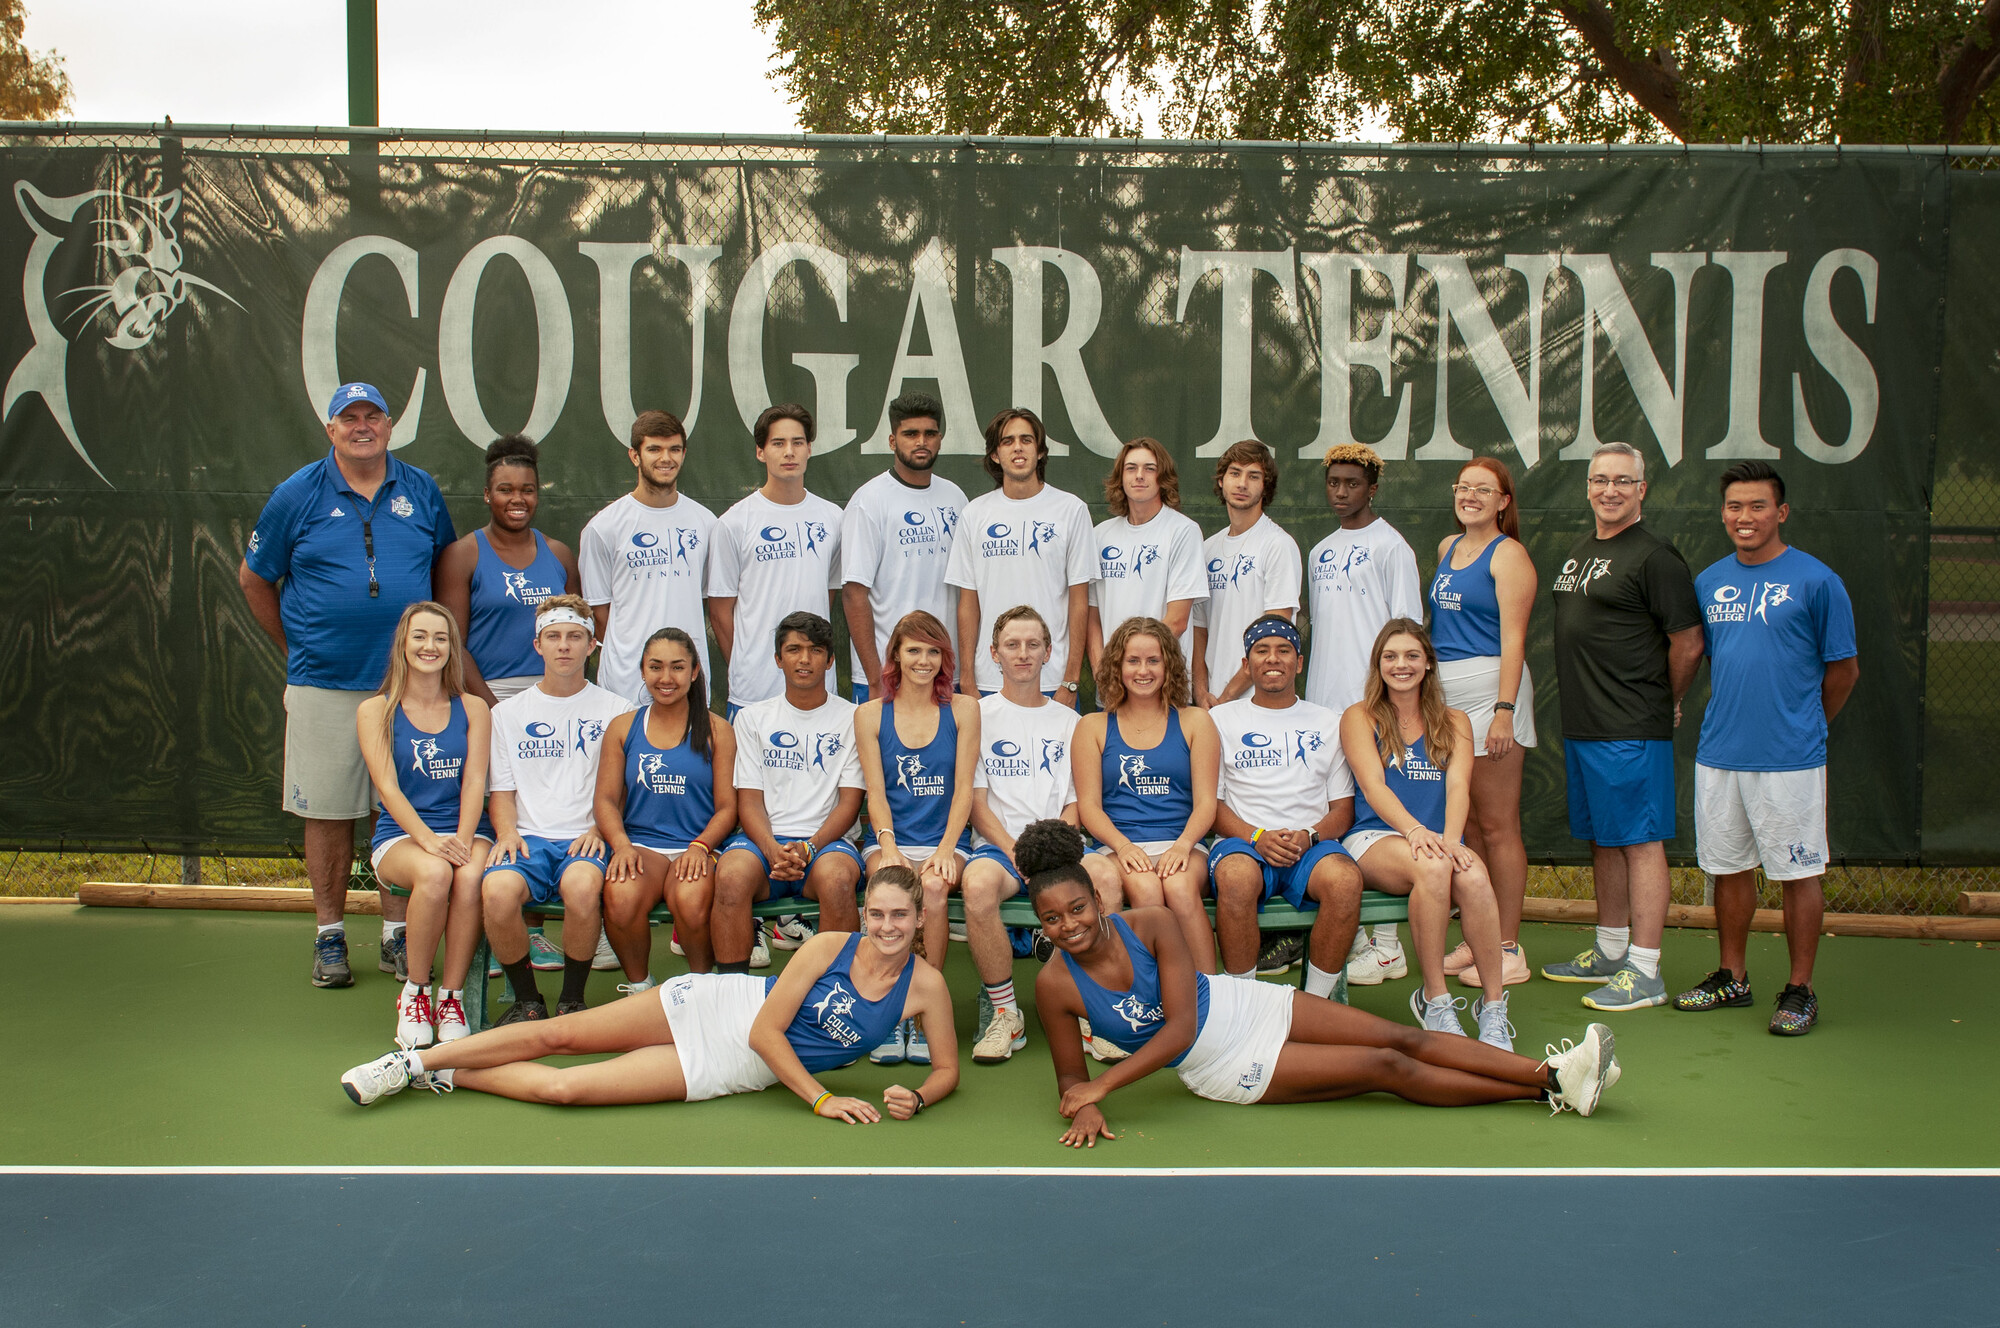 Collin College Tennis Coach Marty Berryman and the men's and women's tennis teams